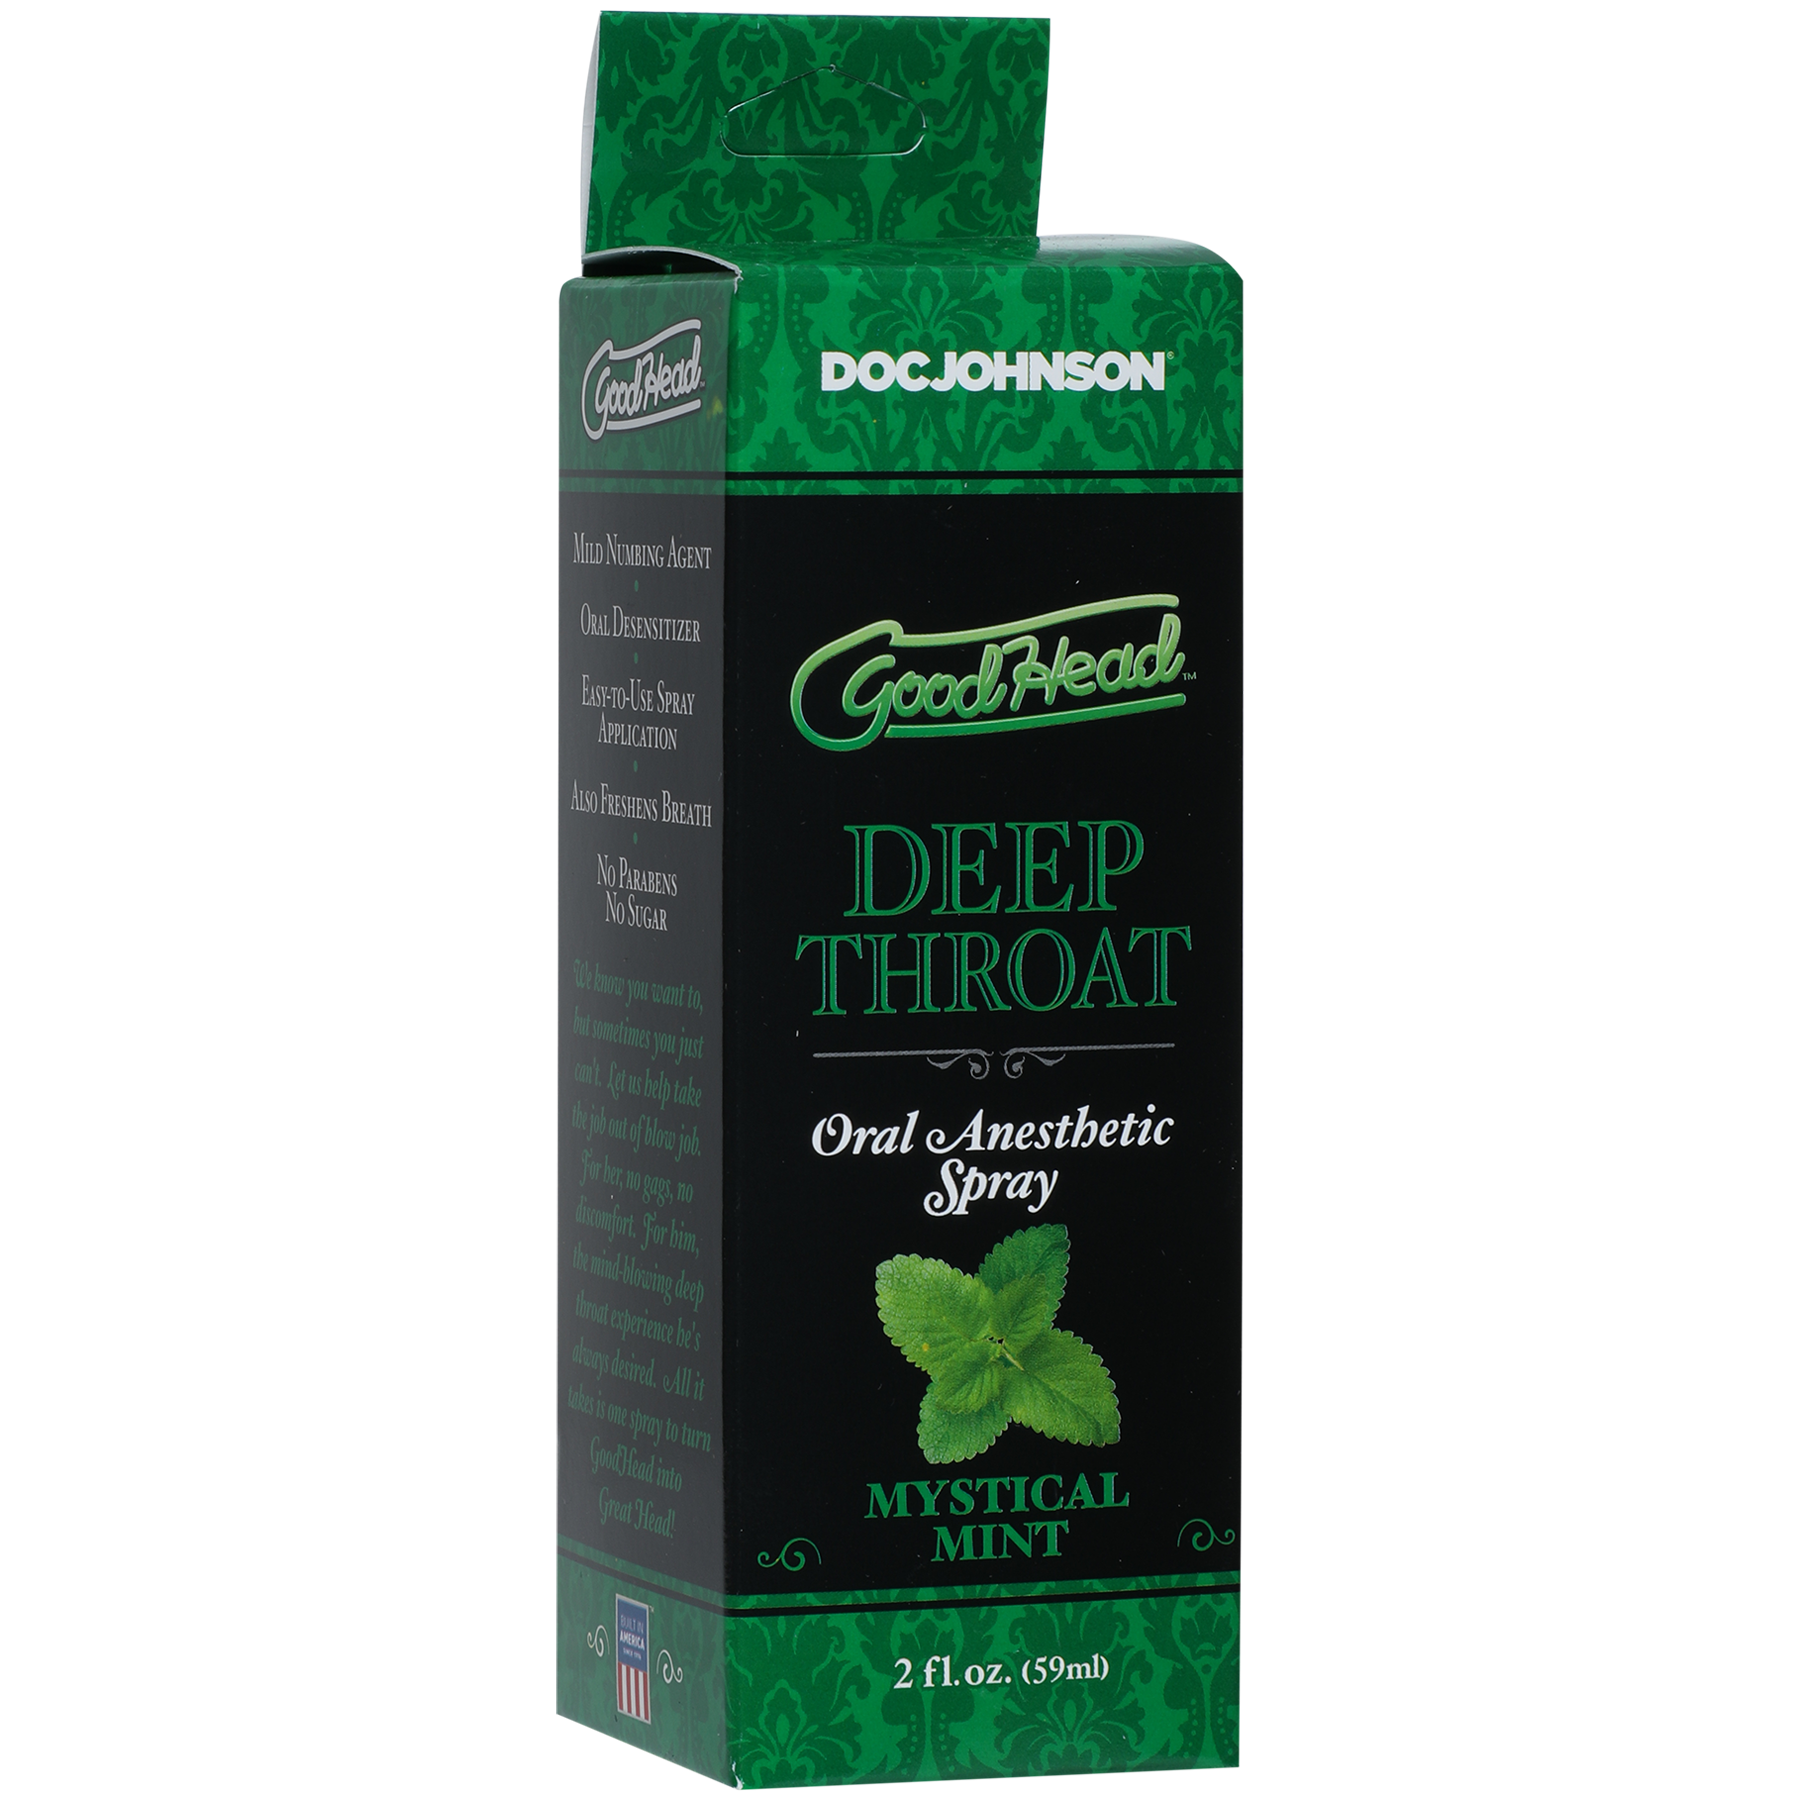 Deep Throat Oral Anesthetic Spray 2oz in its box (mint).